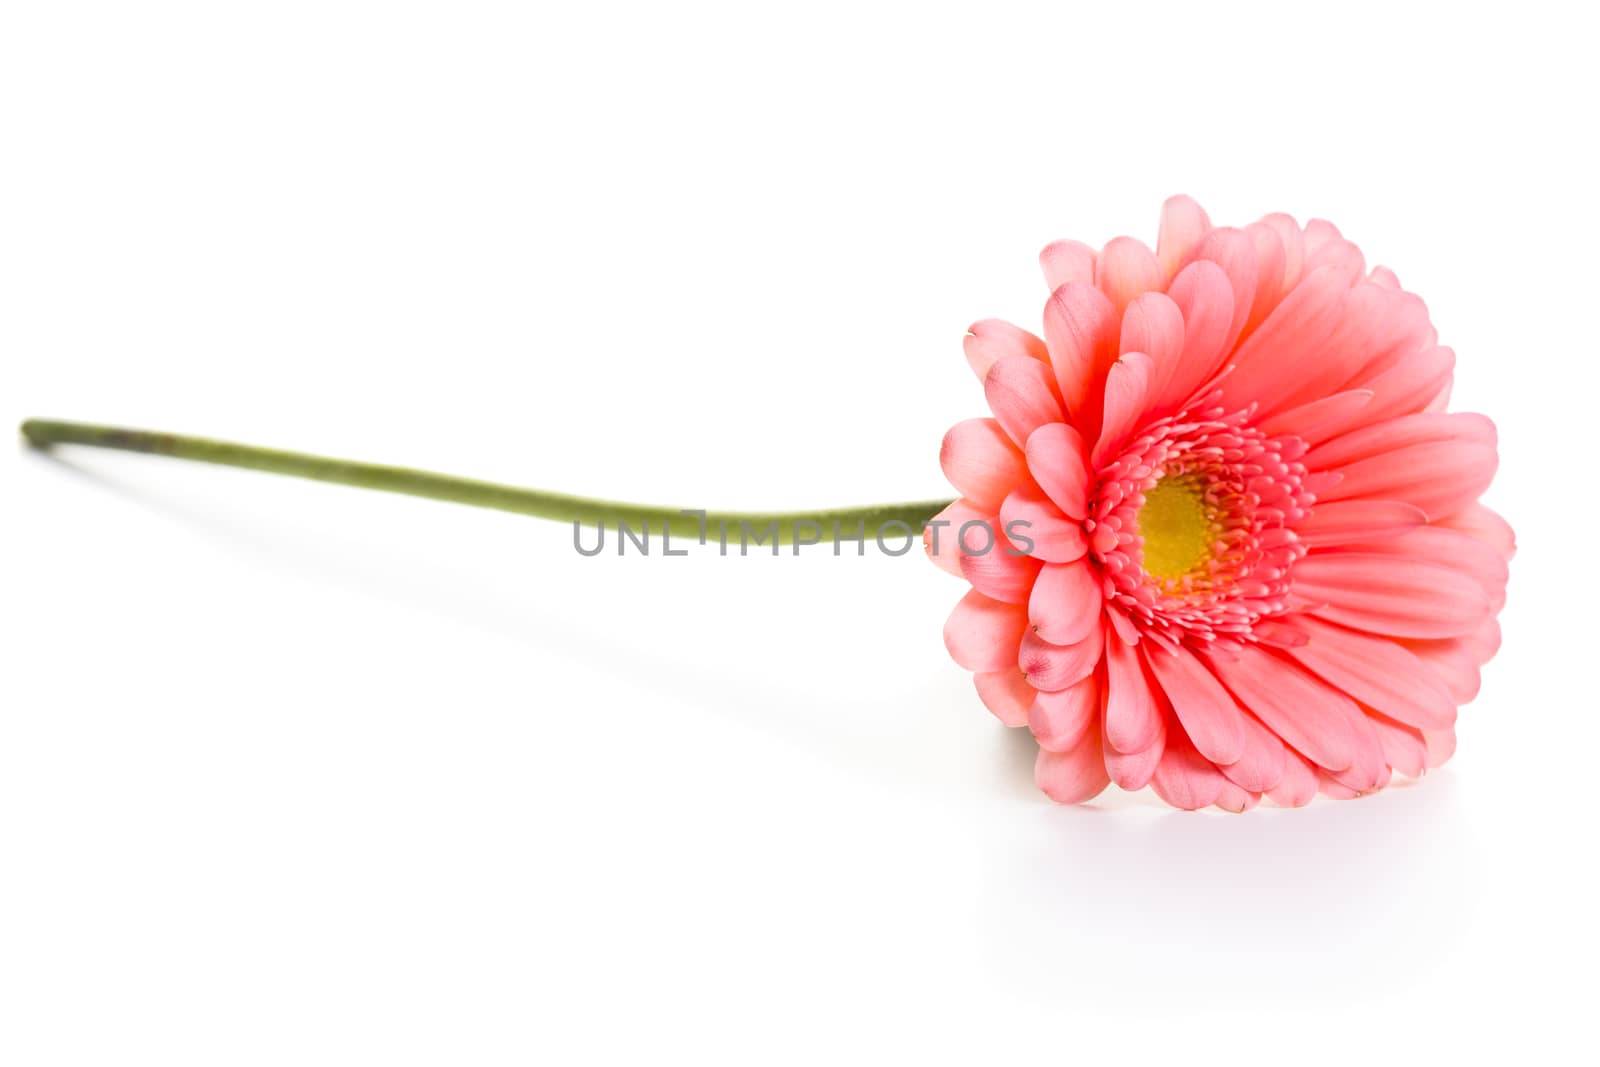 Pink daisy flower isolated on white background